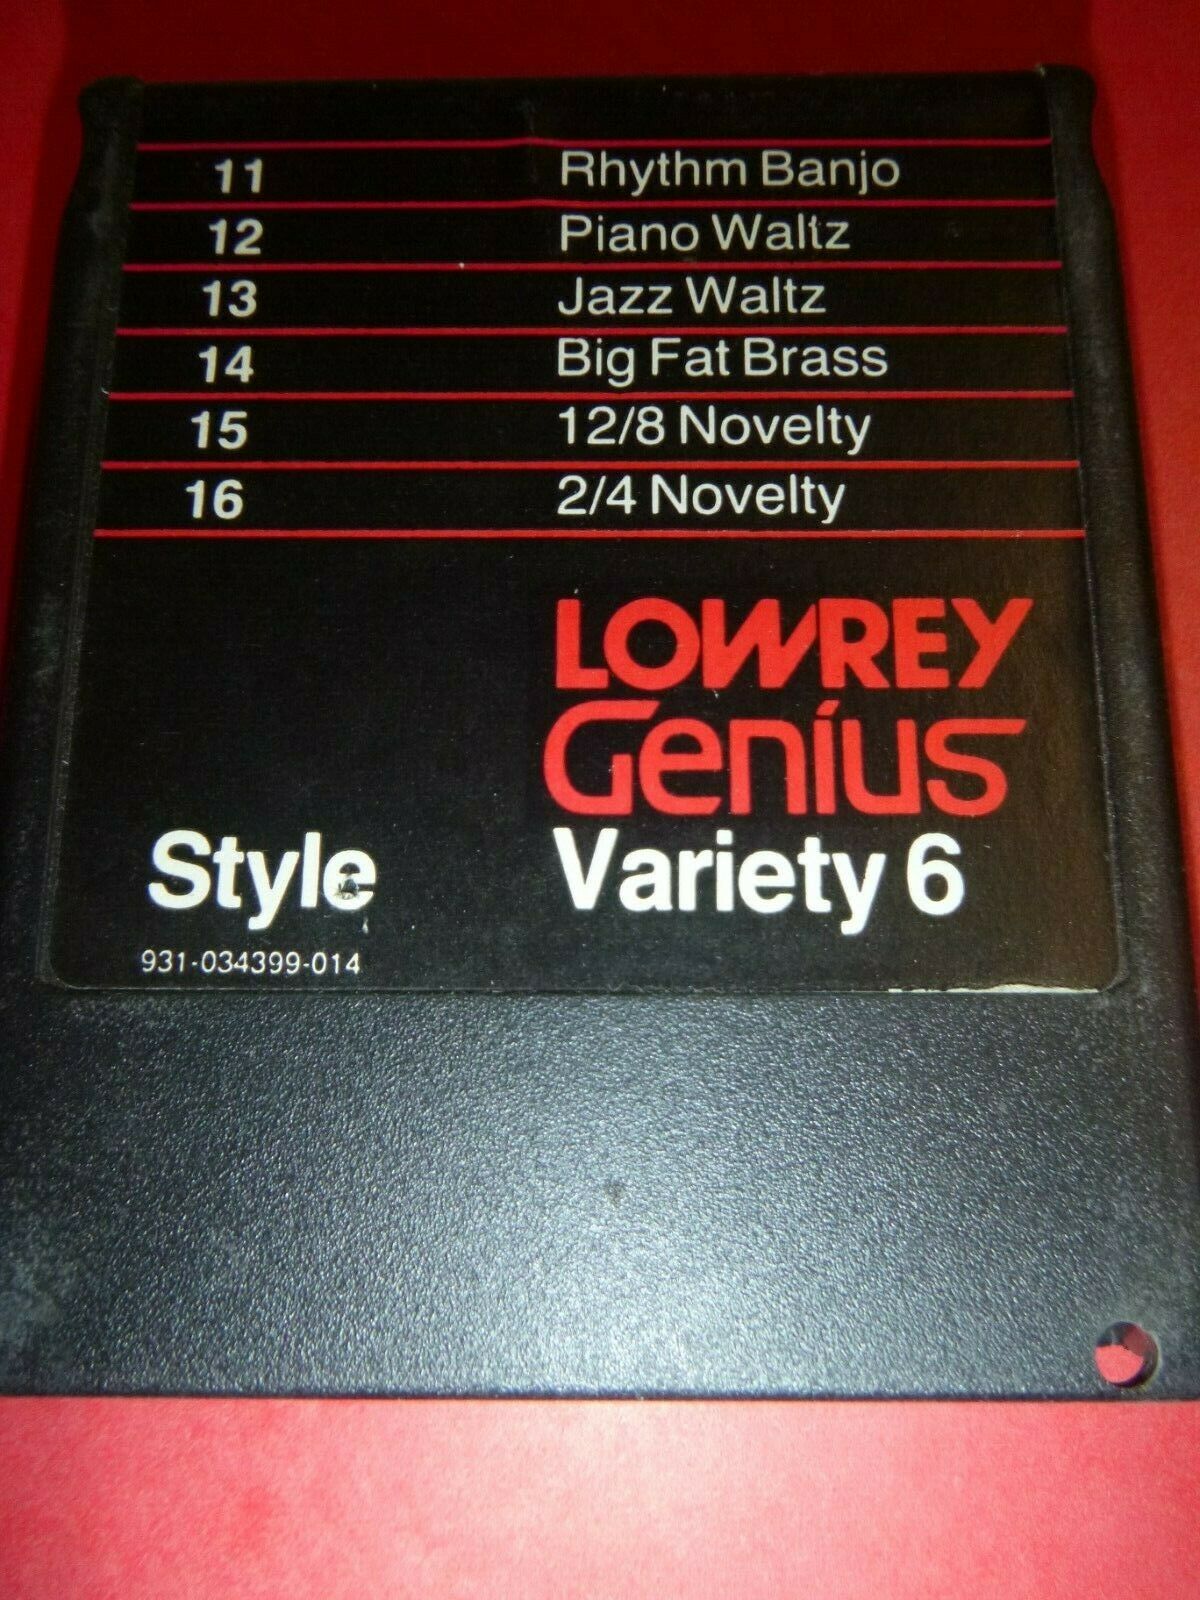 Lowrey Genius Cartridge: Style Variety 6 (see listing for compatible models)